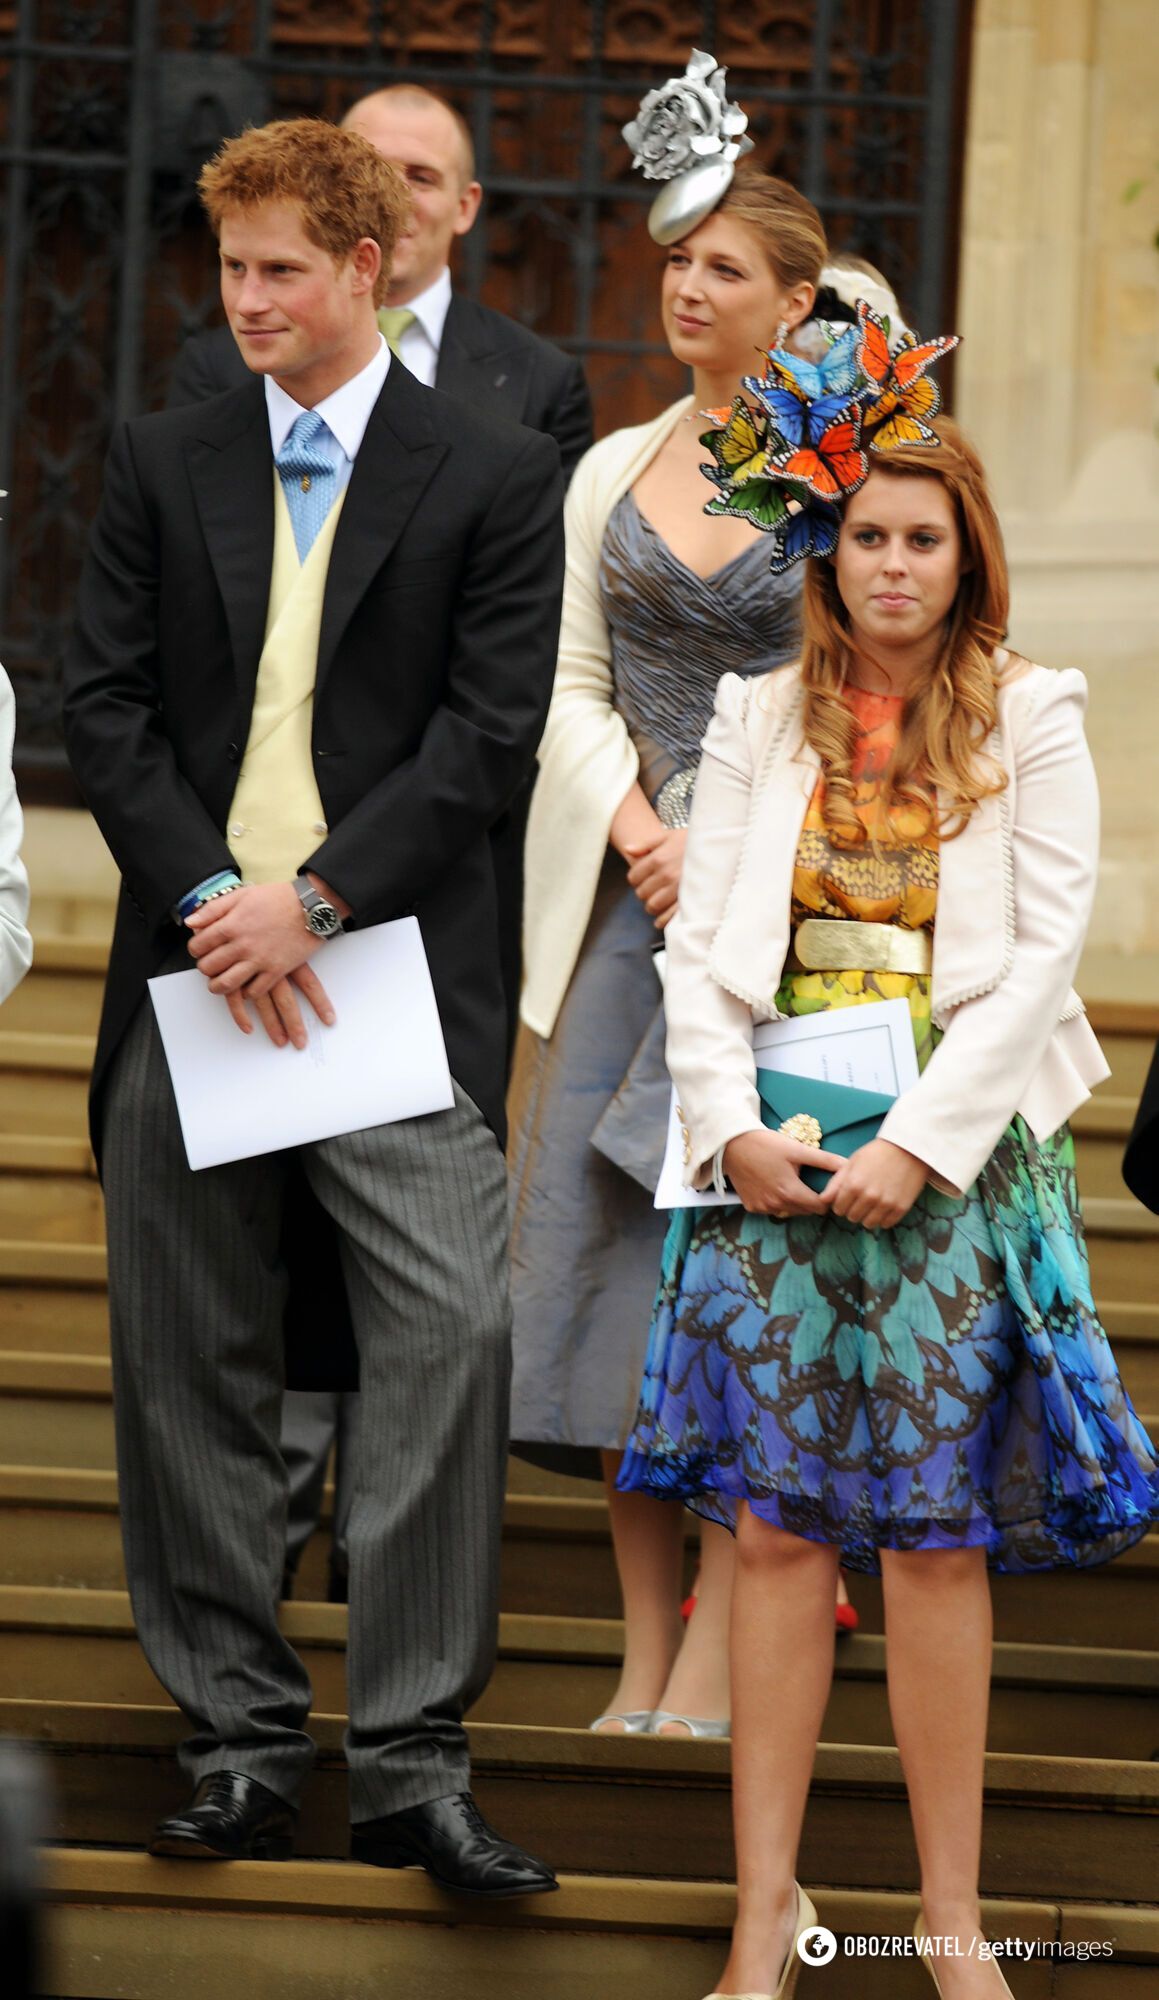 Where were their stylists looking? Top 5 worst outfits of the royals. Photo